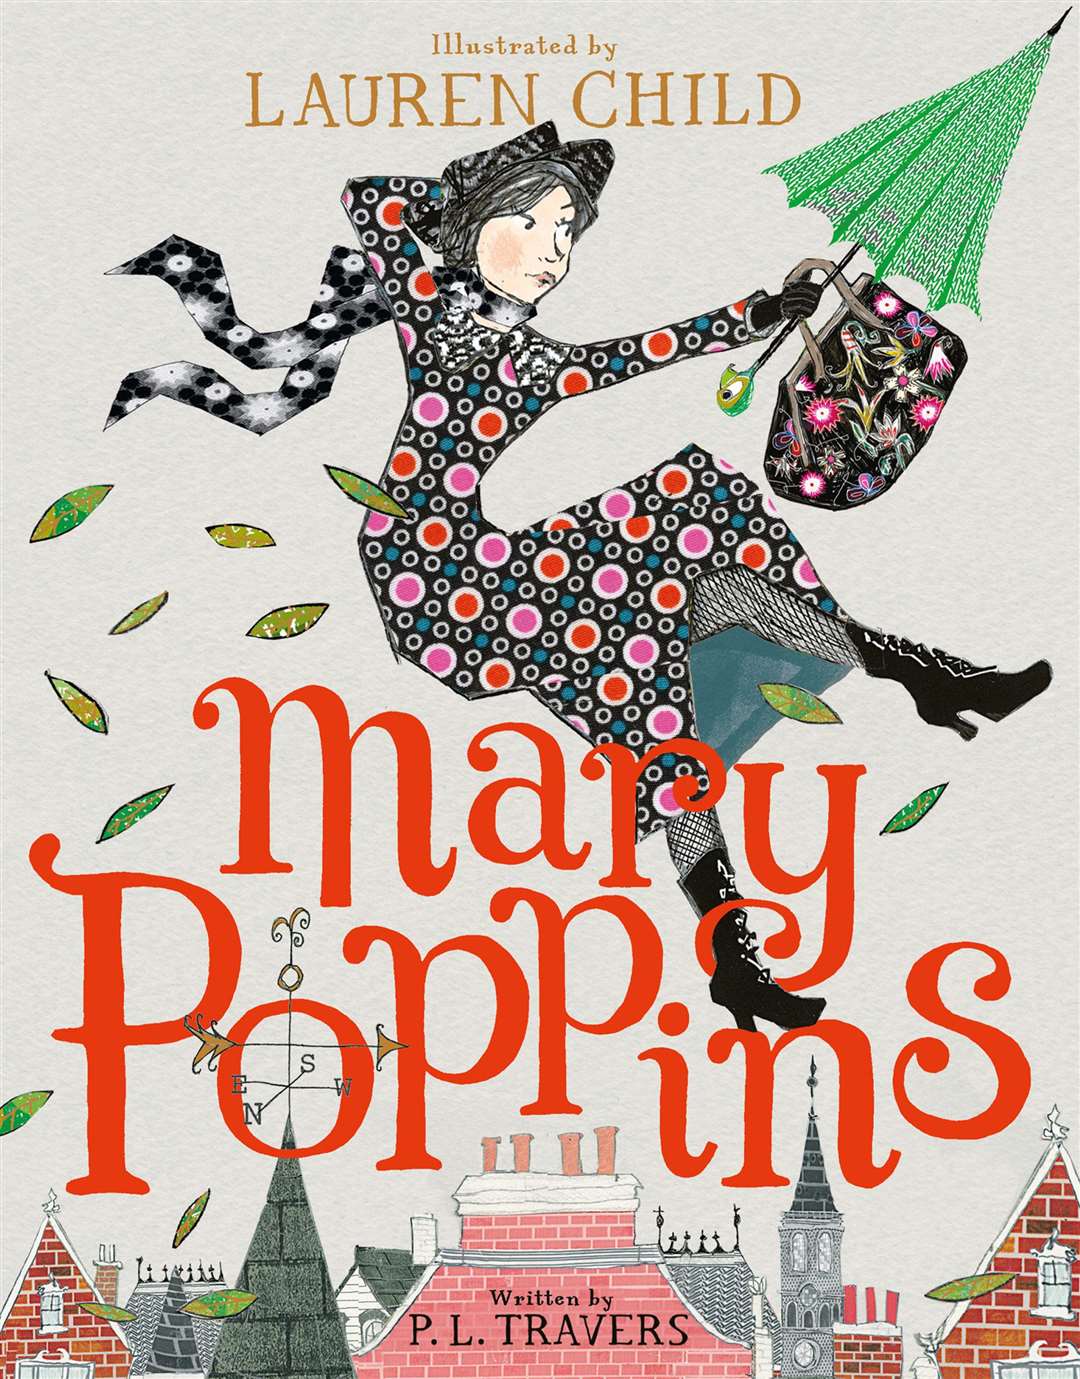 Mary Poppins by P L Travers, illustrated by Lauren Child. Picture credit: HarperCollins Children's Books/PA.